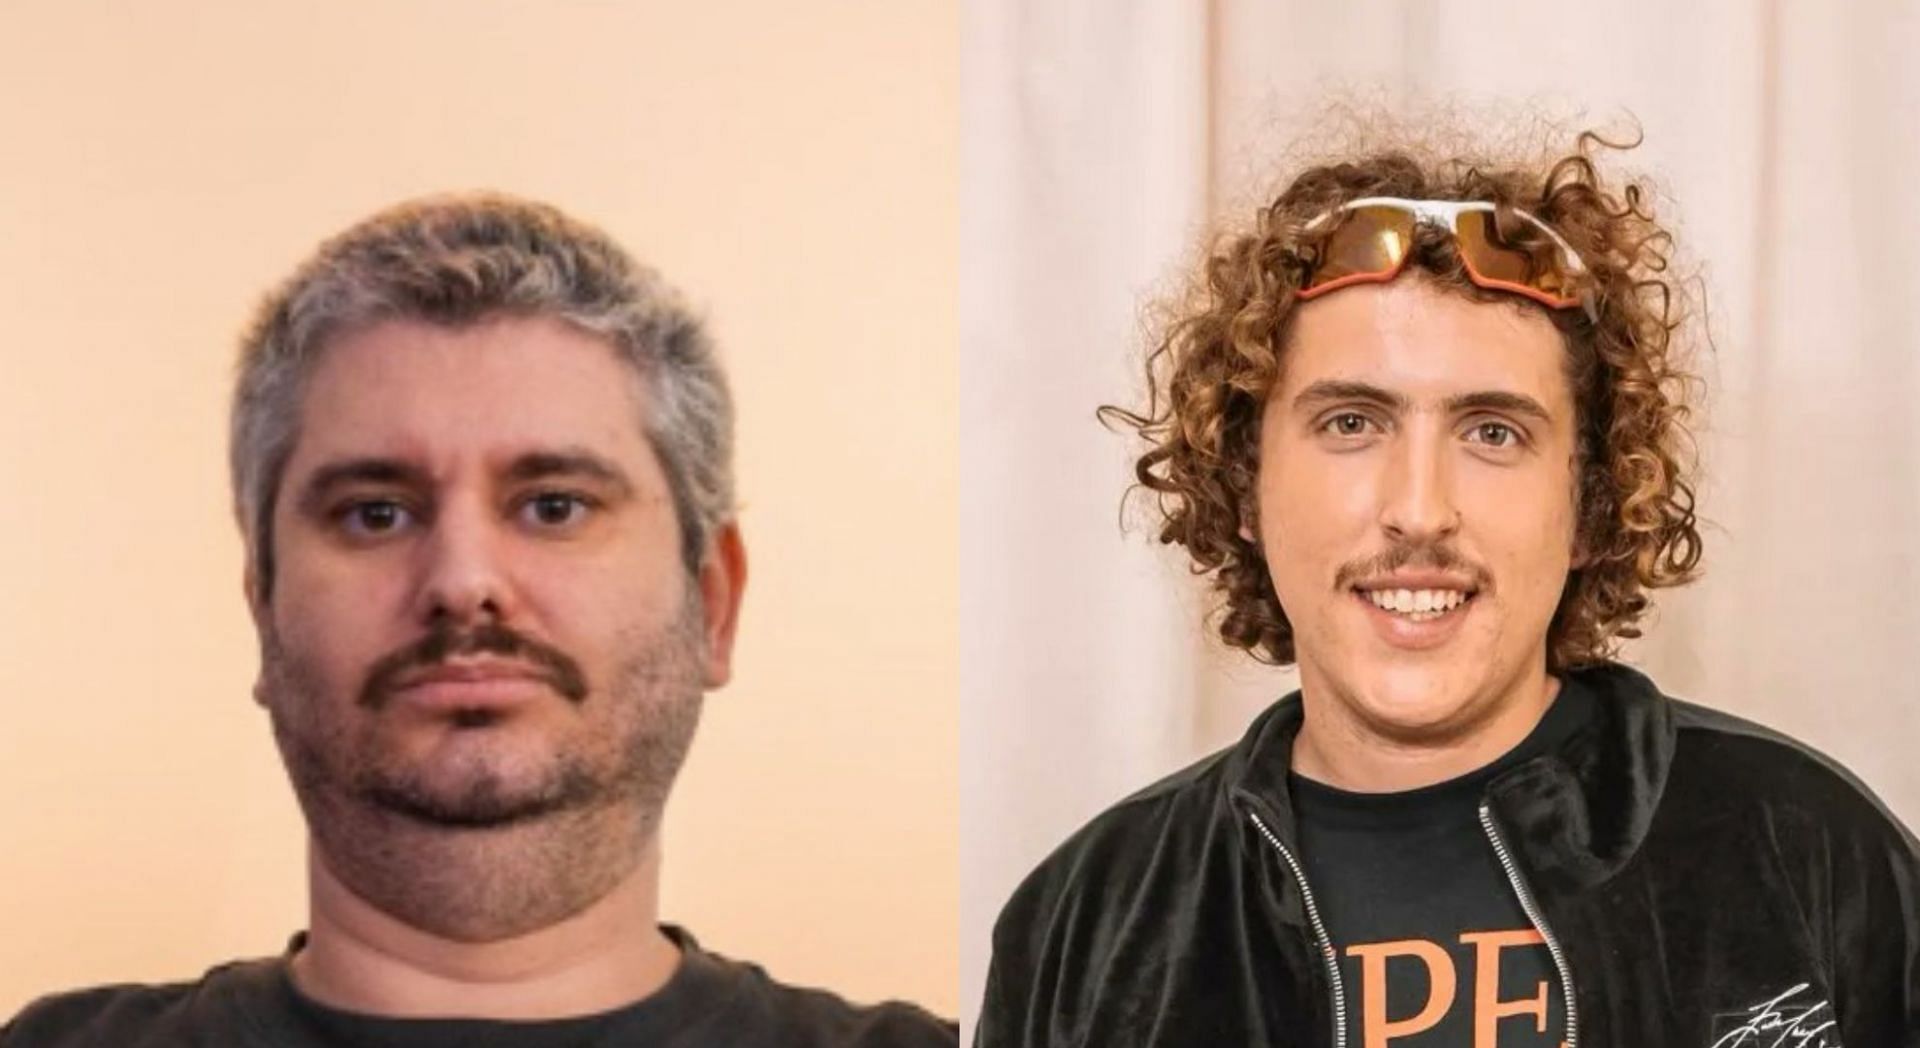 Ethan Klein revealed that Andrew Callaghan was in a psych ward following misconduct allegations (Image via Getty Images)